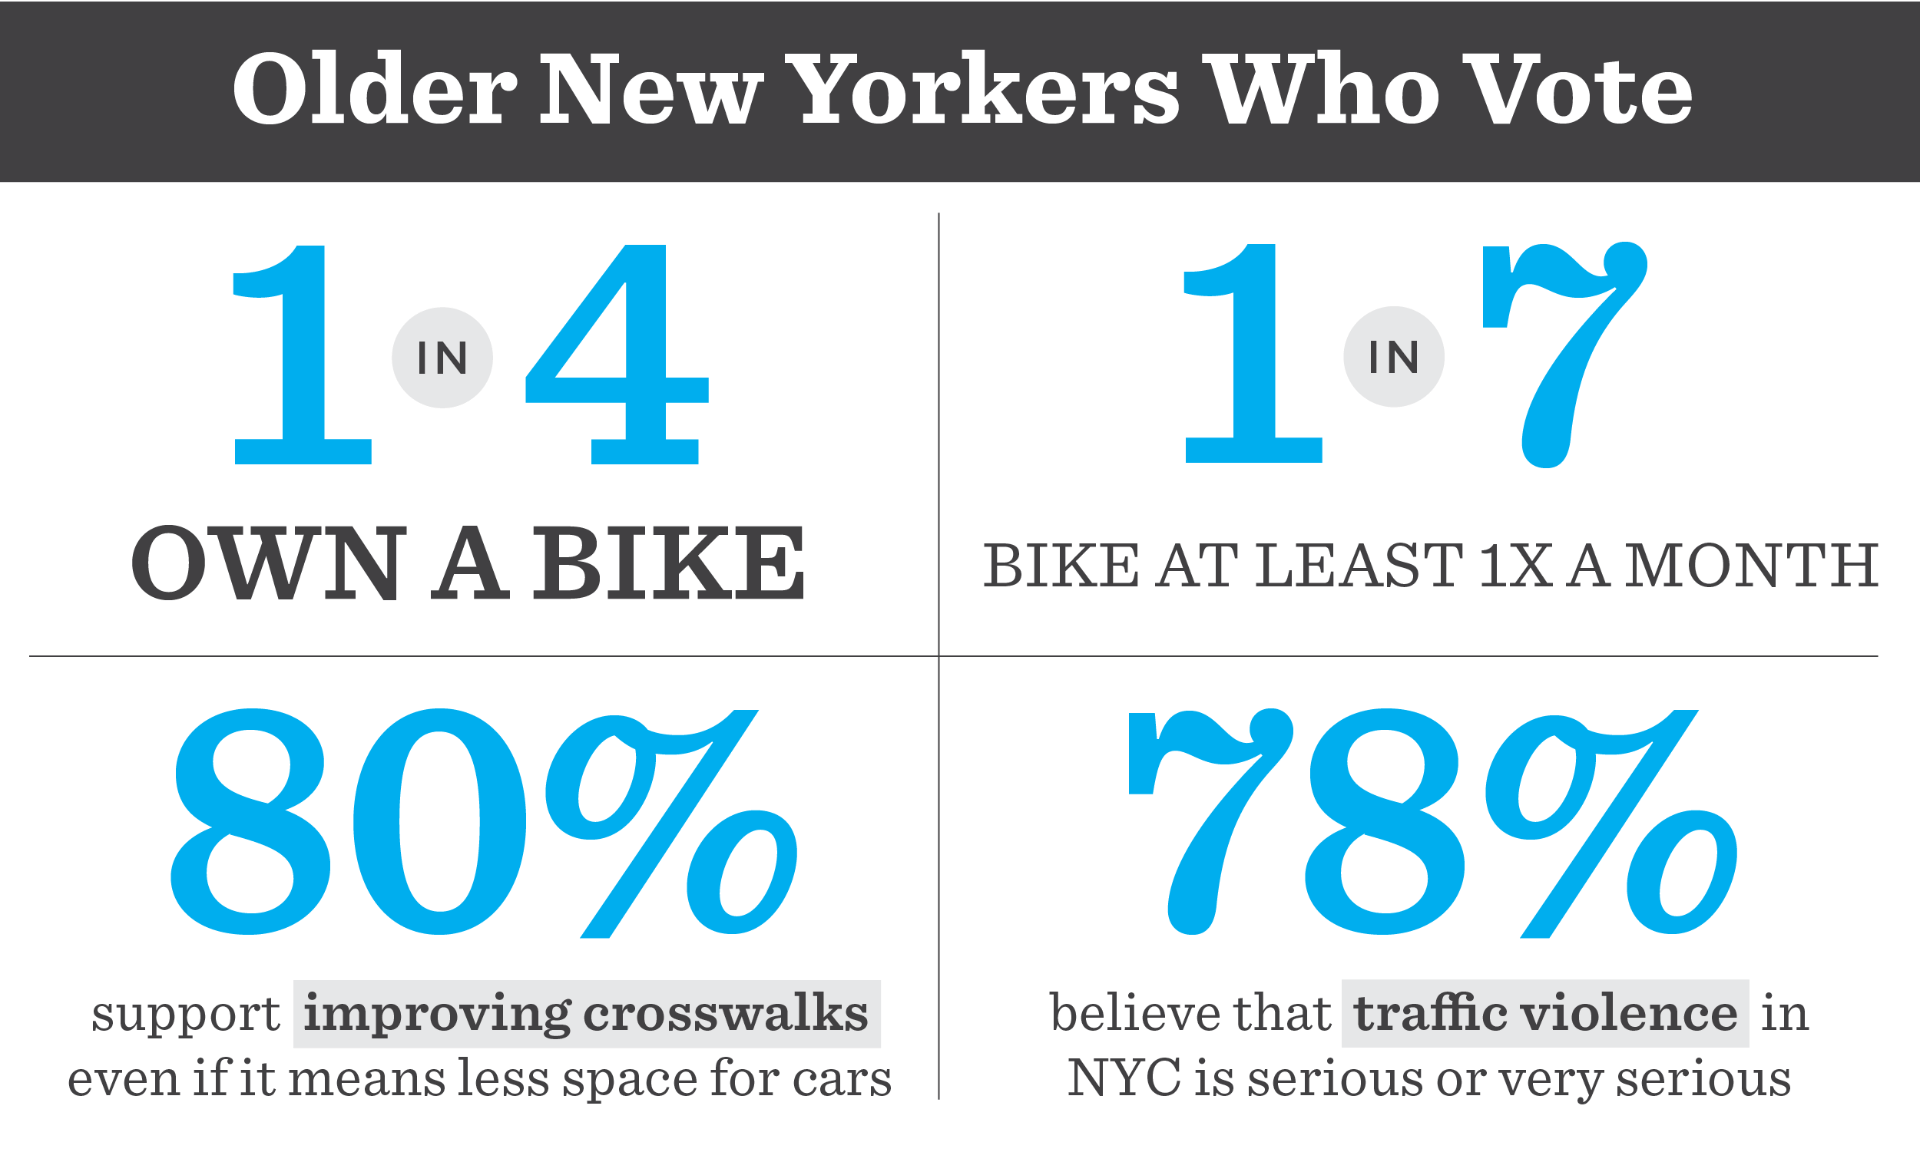 Graphic text about older New Yorkers who vote: "One in four own a bike, one in seven bike at least once per month, 80 percent support improving crosswalks even if it means less space for cars, and 78 percent believe tha traffic violence in NYC is serious or very serious."